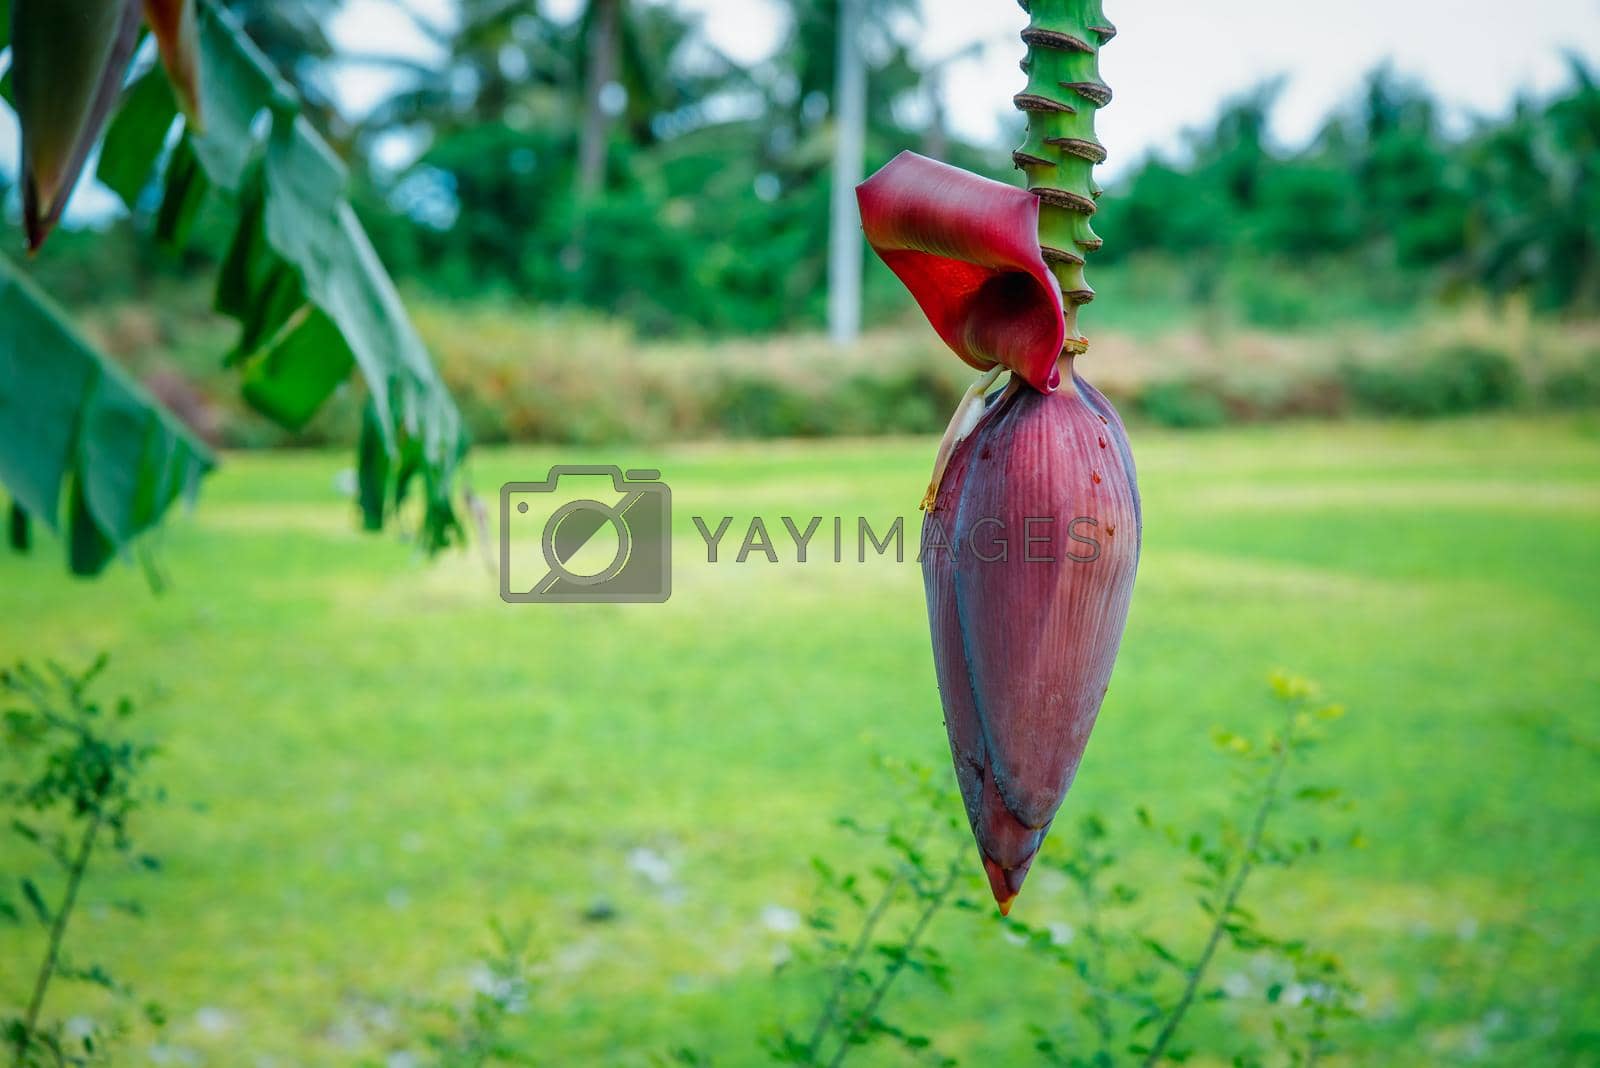 Greenery background, green color of nature plant and leaf environment greenery concept (Banana)